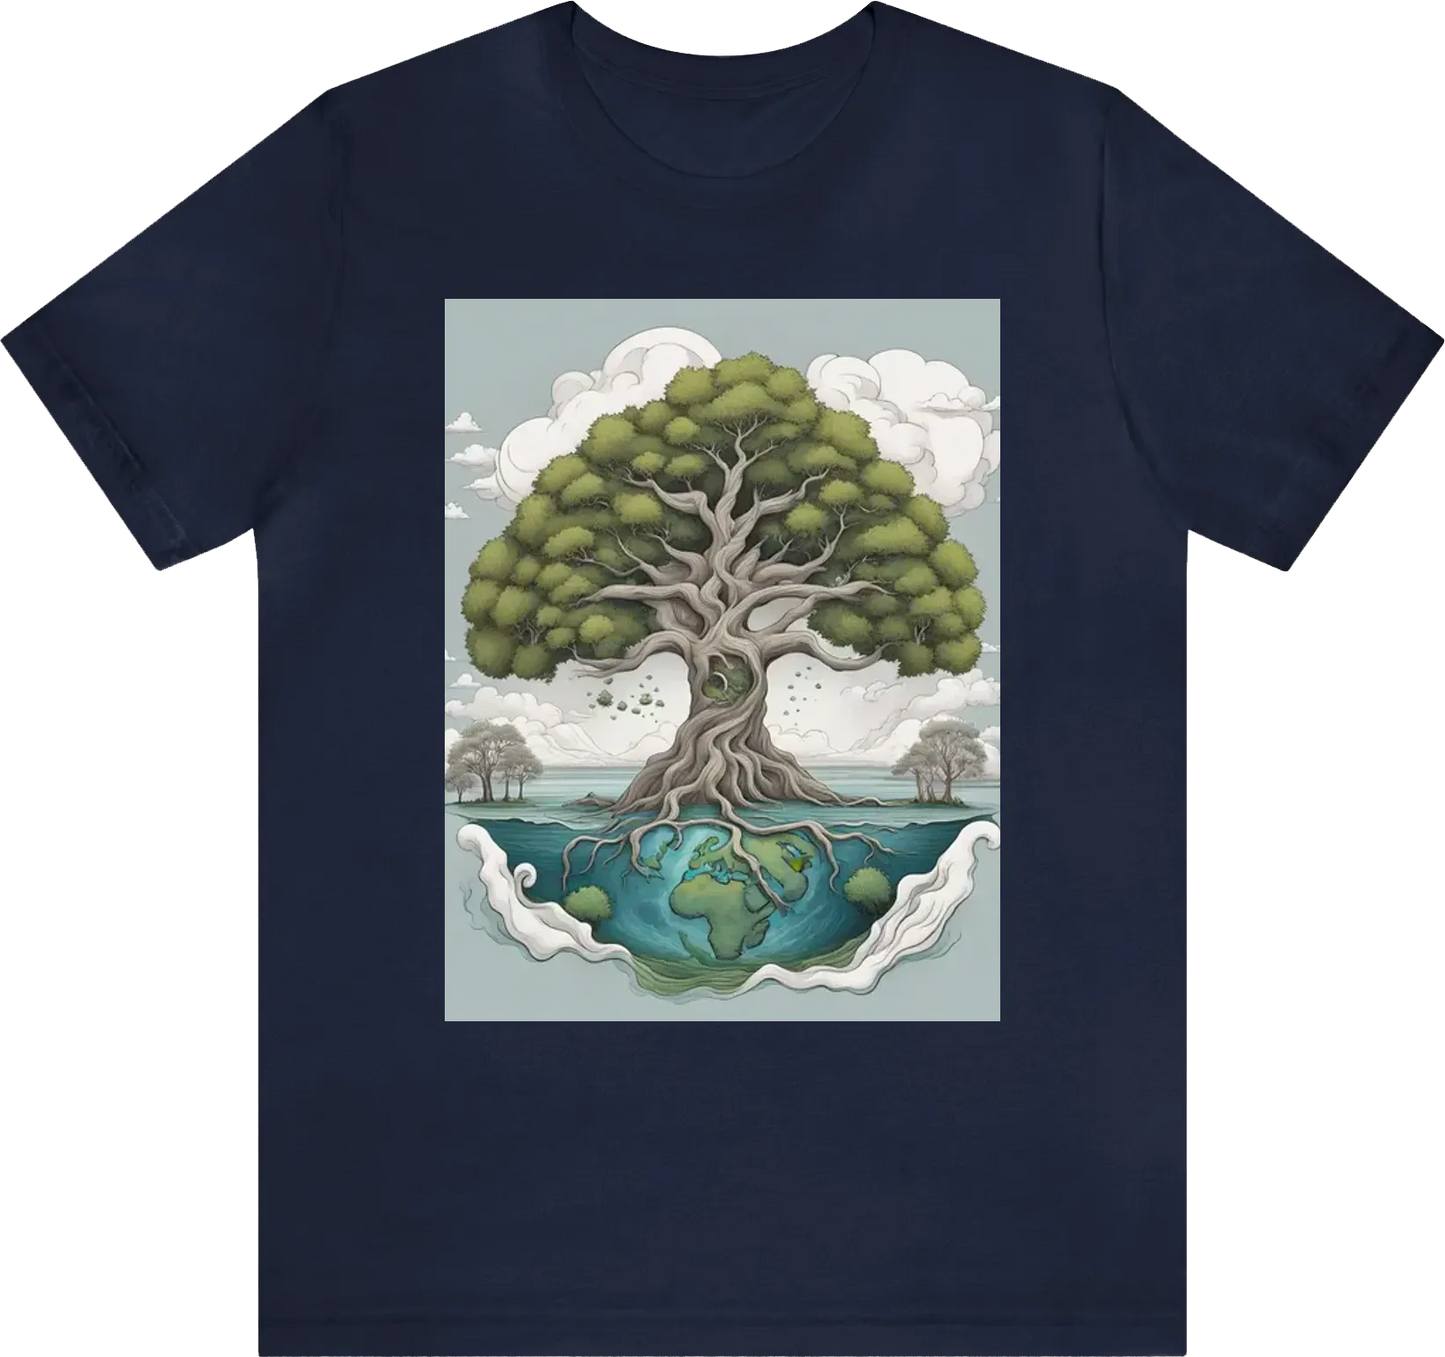 Create a T-shirt design that conveys a message about climate change in a beautiful and magnificent way. The design should feature the following elements:  An ancient and majestic tree as the central focal point, intricately detailed. Surrounding the tree,